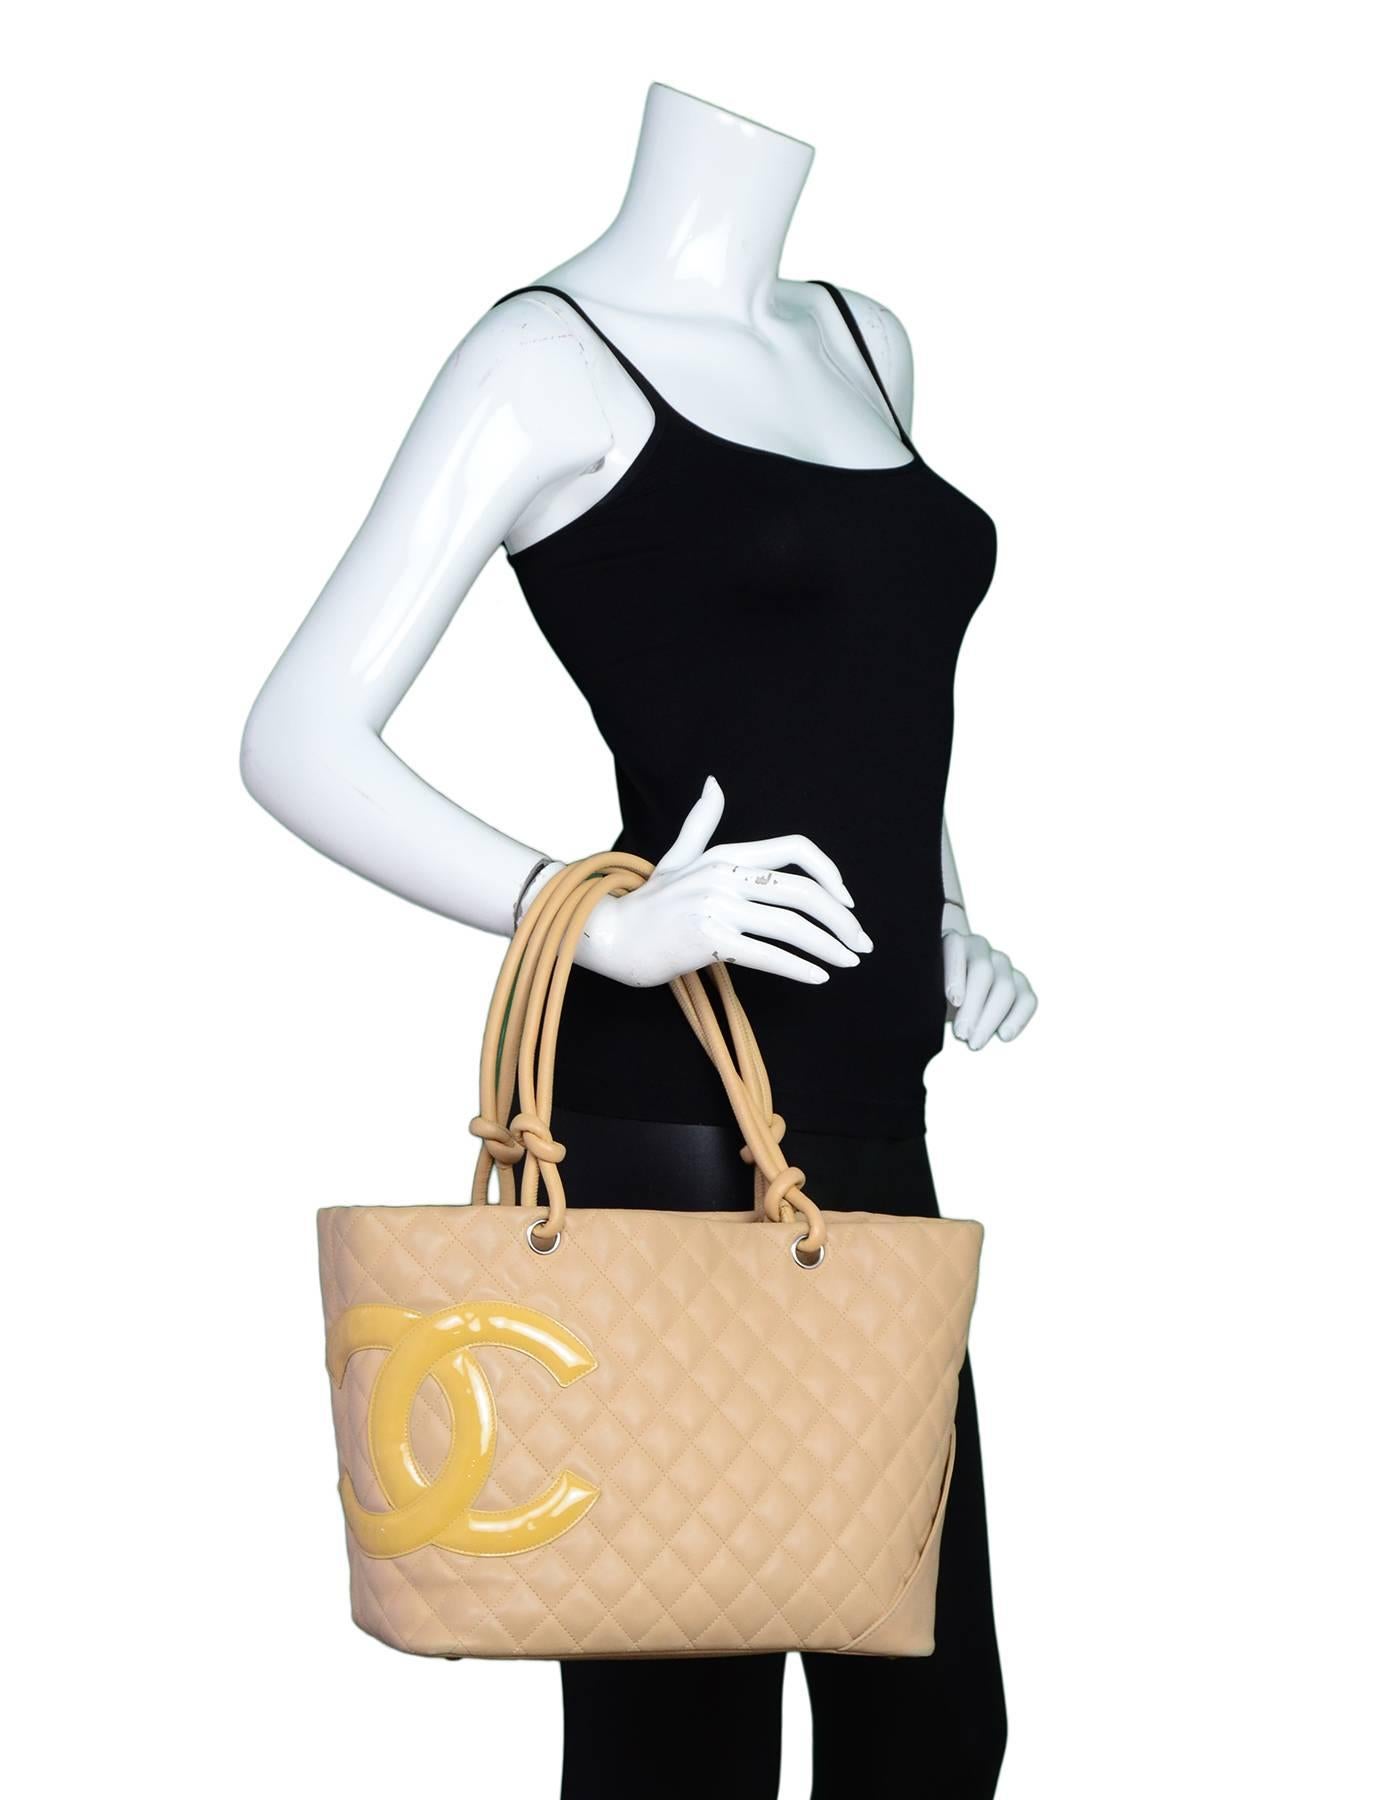 100% Authentic Chanel Beige Quilted Cambon Tote. Features oversized yellow patent leather CC logo with silvertone hardware, one back pocket and knotted shoulder straps. Interior features a vibrant orange lining with two zippered pockets and one cell